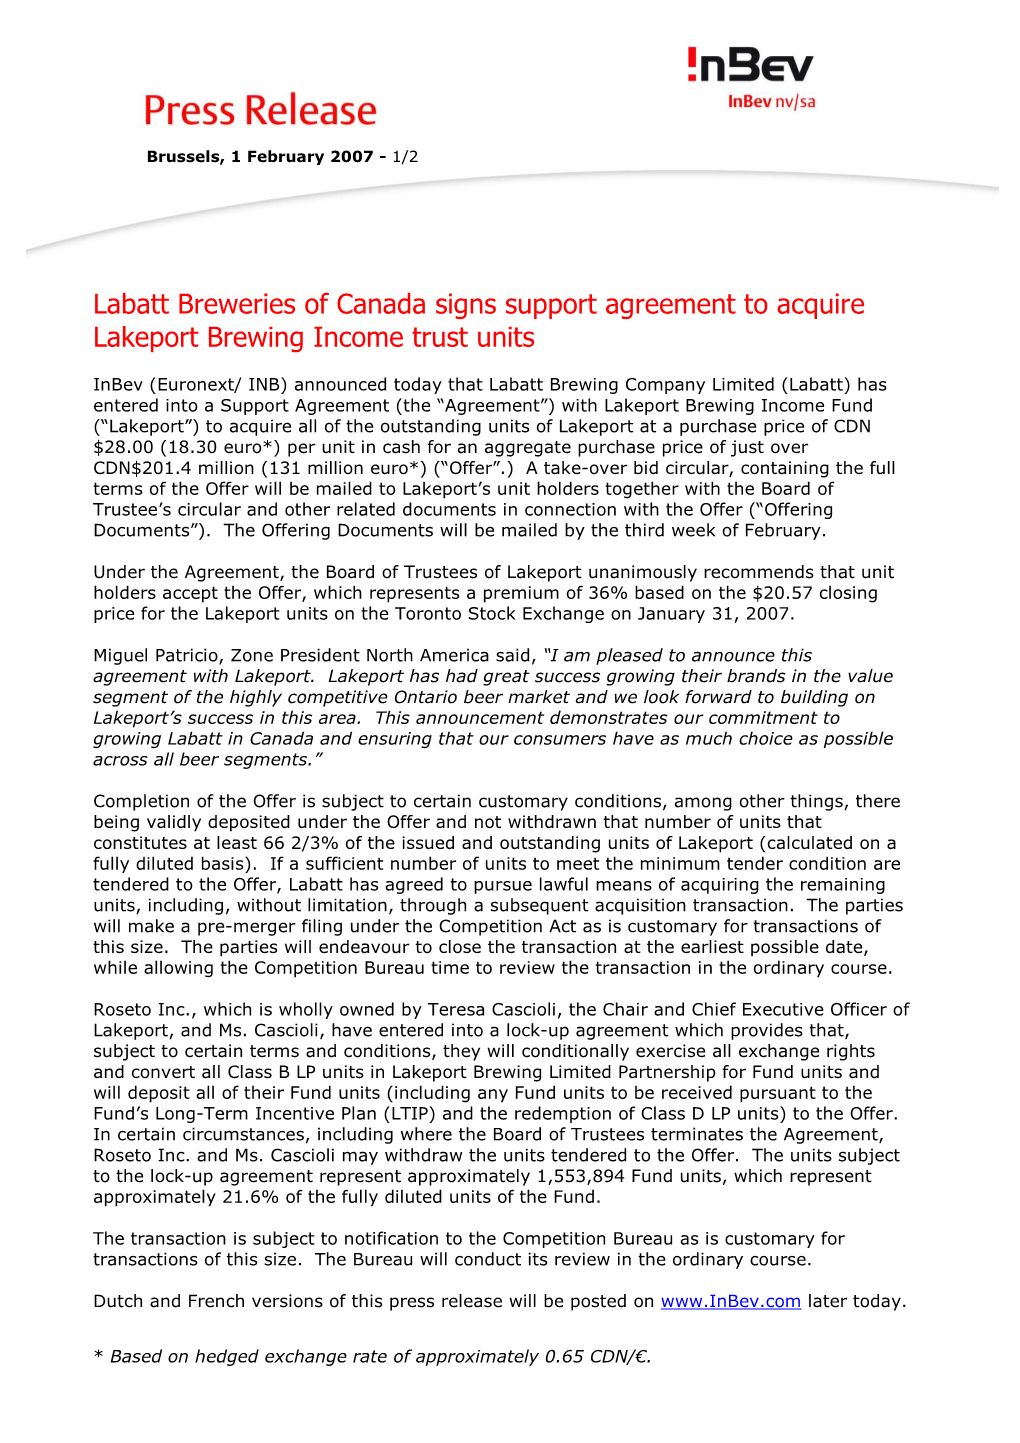 Labatt Breweries of Canada Signs Support Agreement to Acquire Lakeport Brewing Income Trust Units